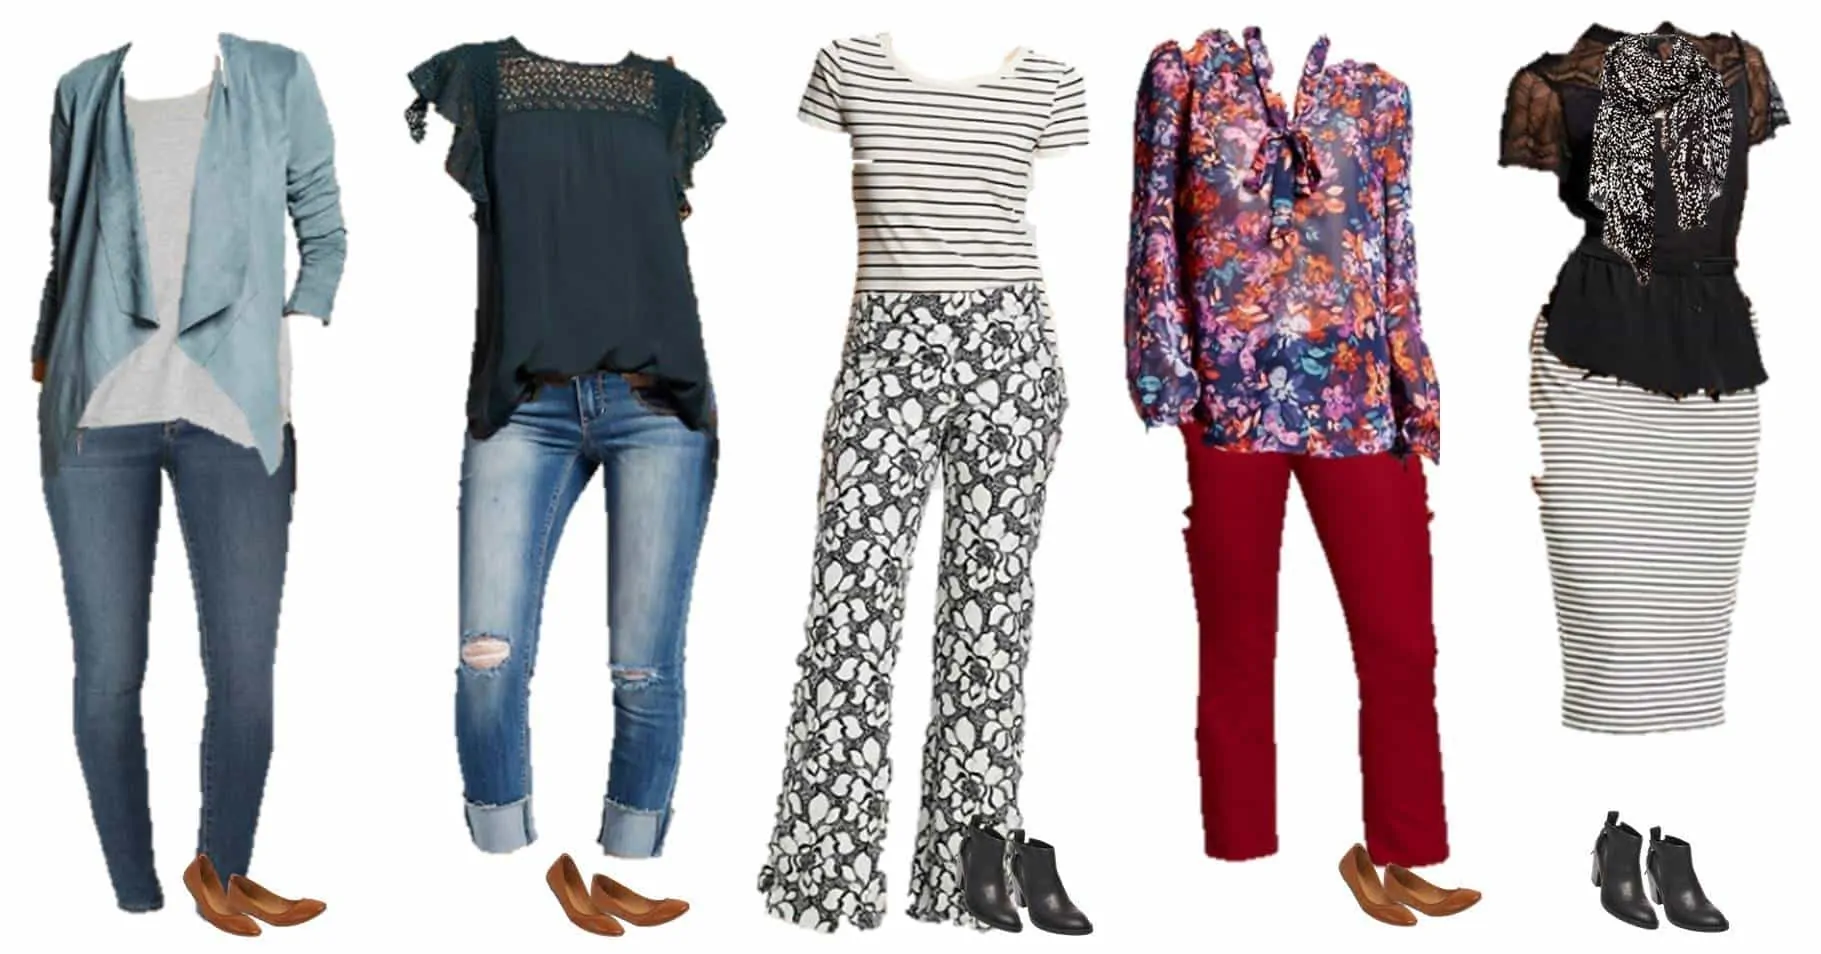 8.2 Mix and Match Fashion - Fall Styles from Target 1-5